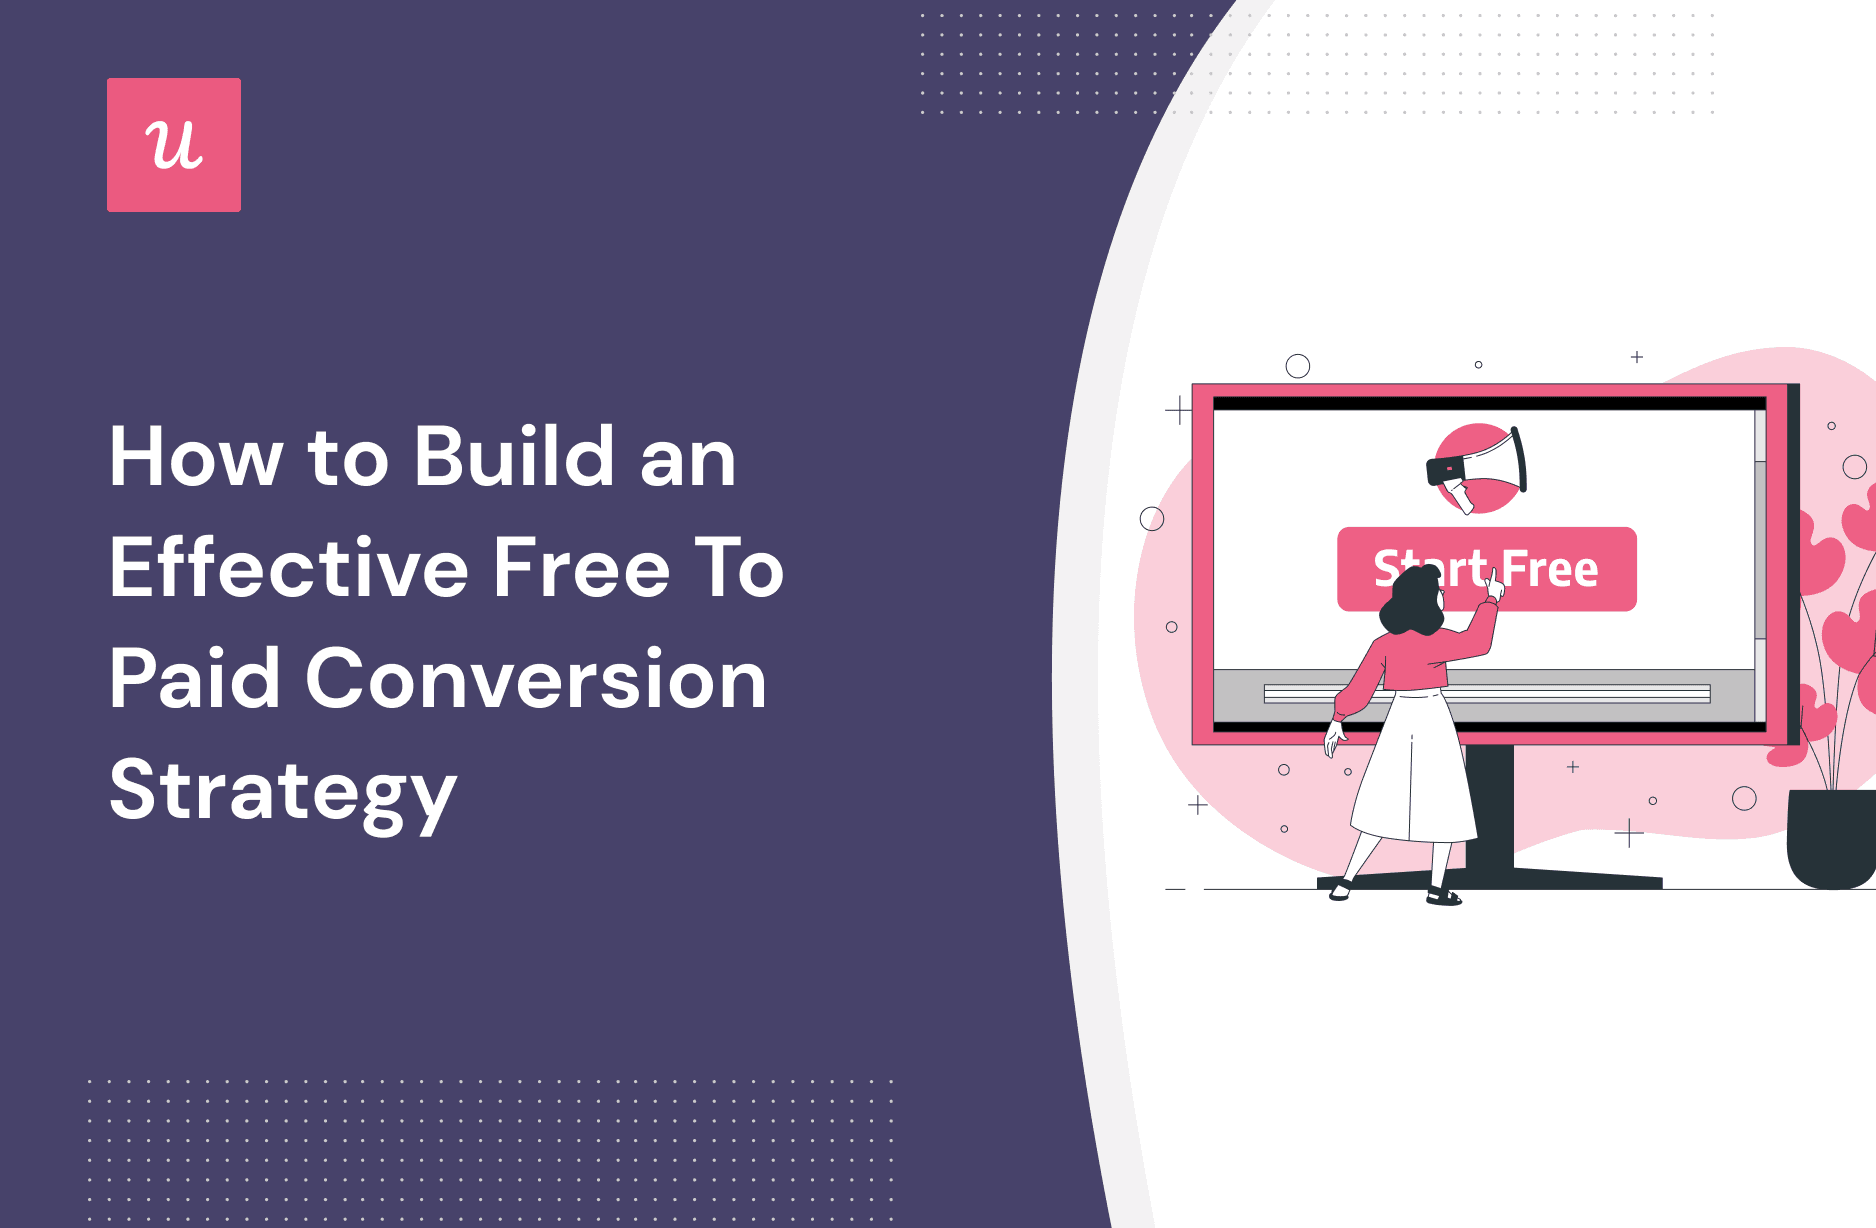 How To Build an Effective Free To Paid Conversion Strategy cover